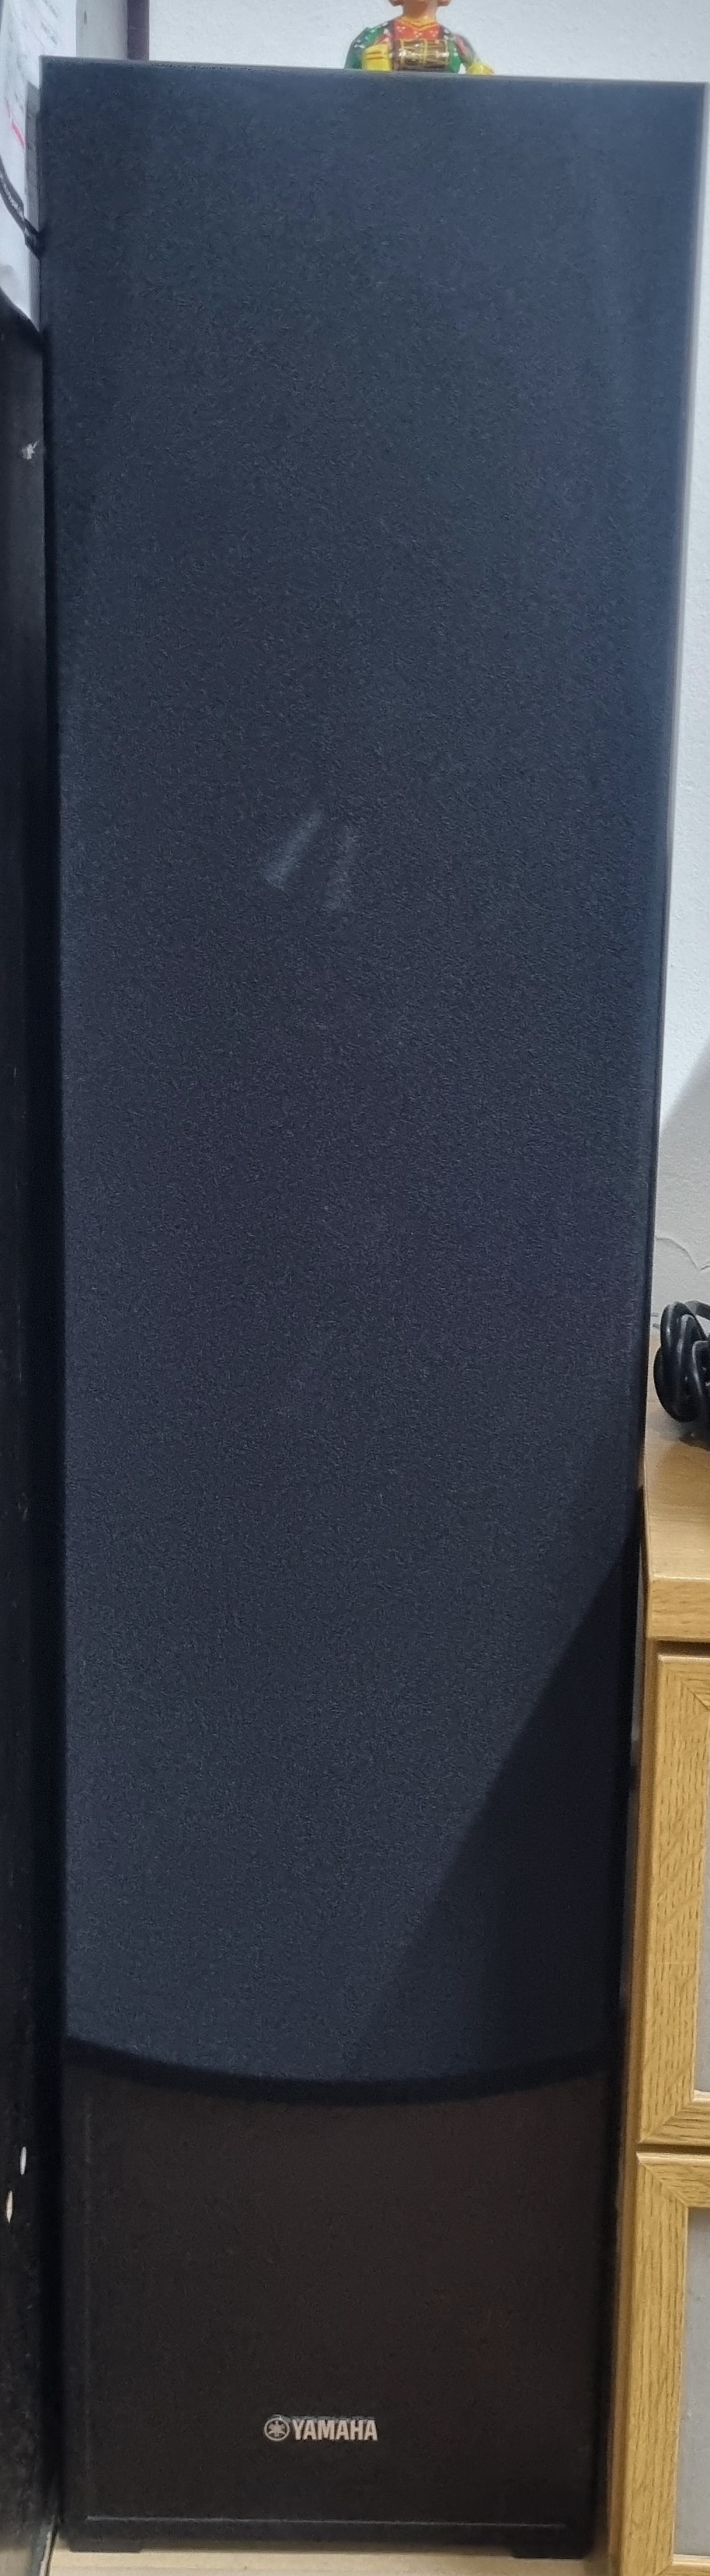 Yamaha Tower Speaker (new) and Pioneer Center Channel Speaker for sale